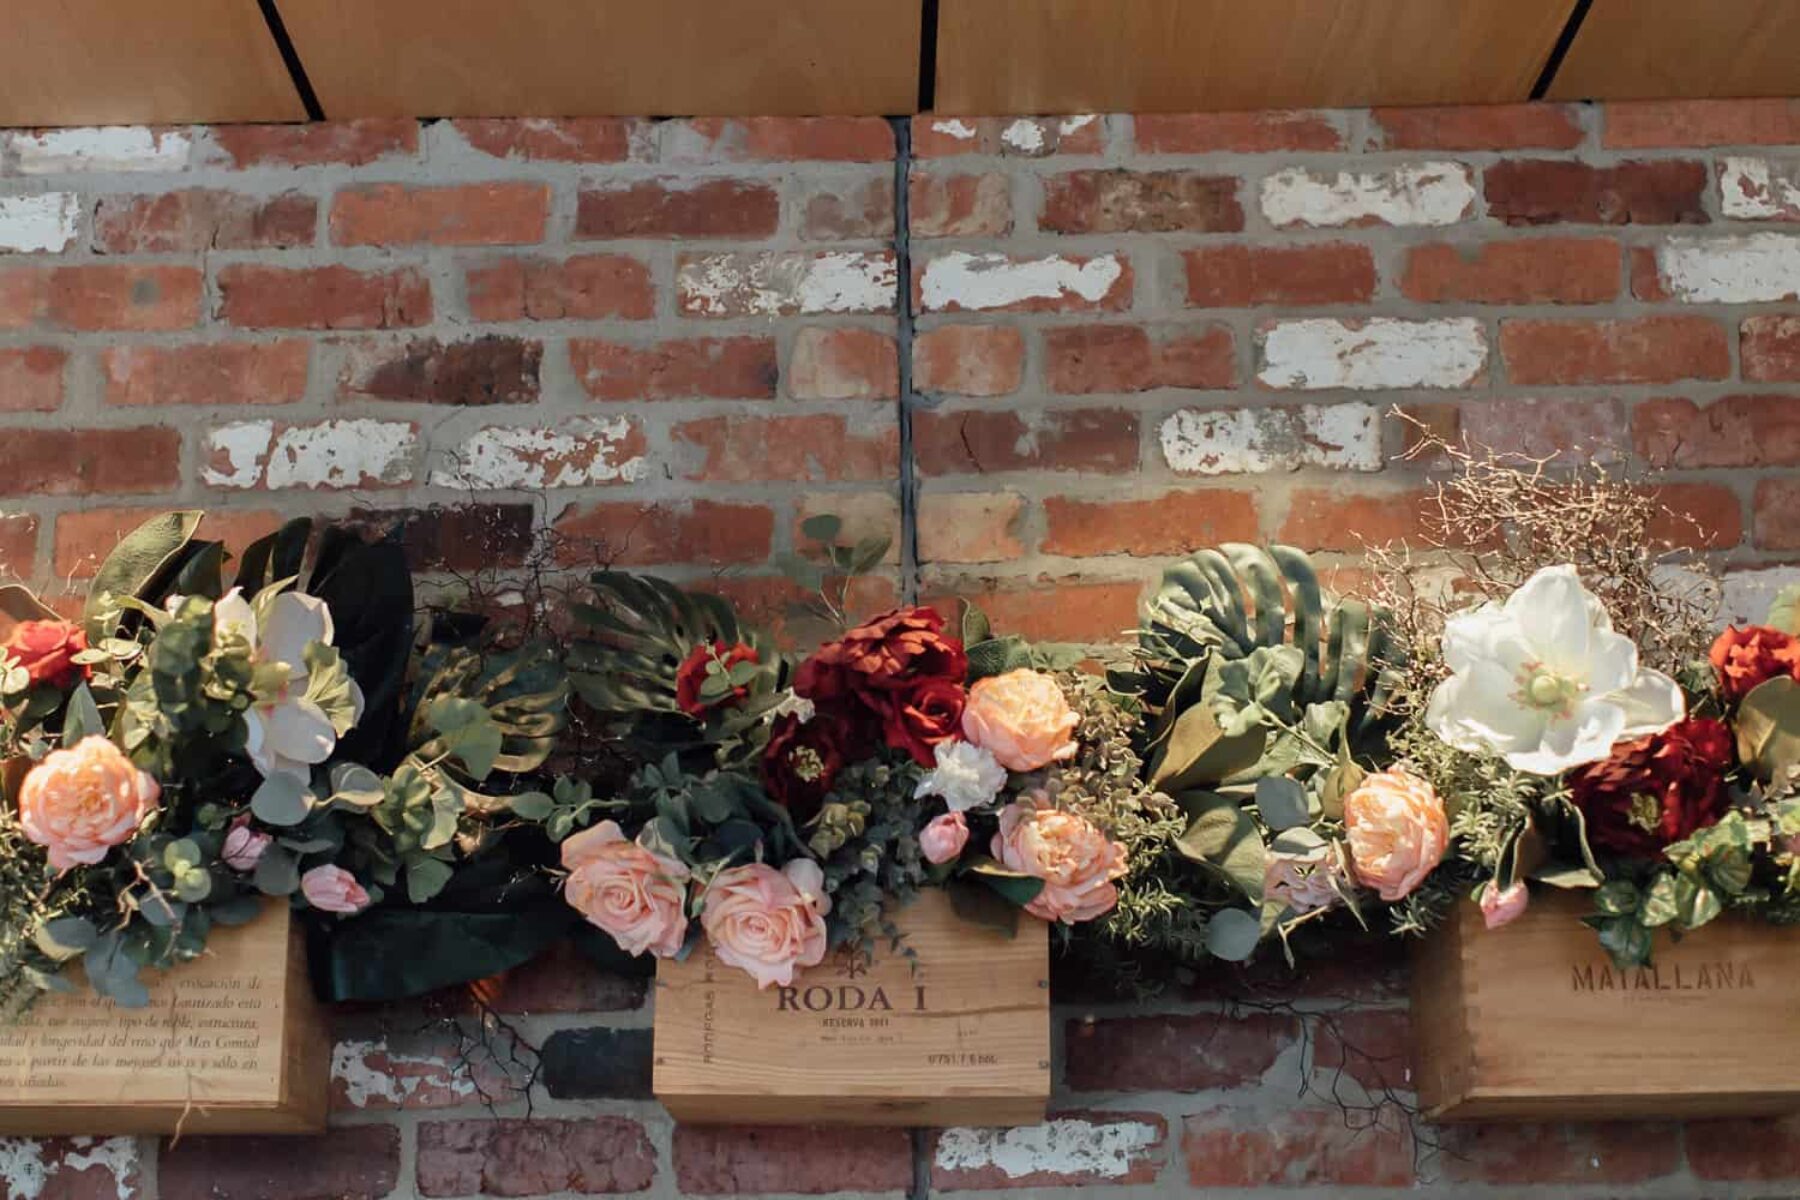 floral arch installation on exposed brick